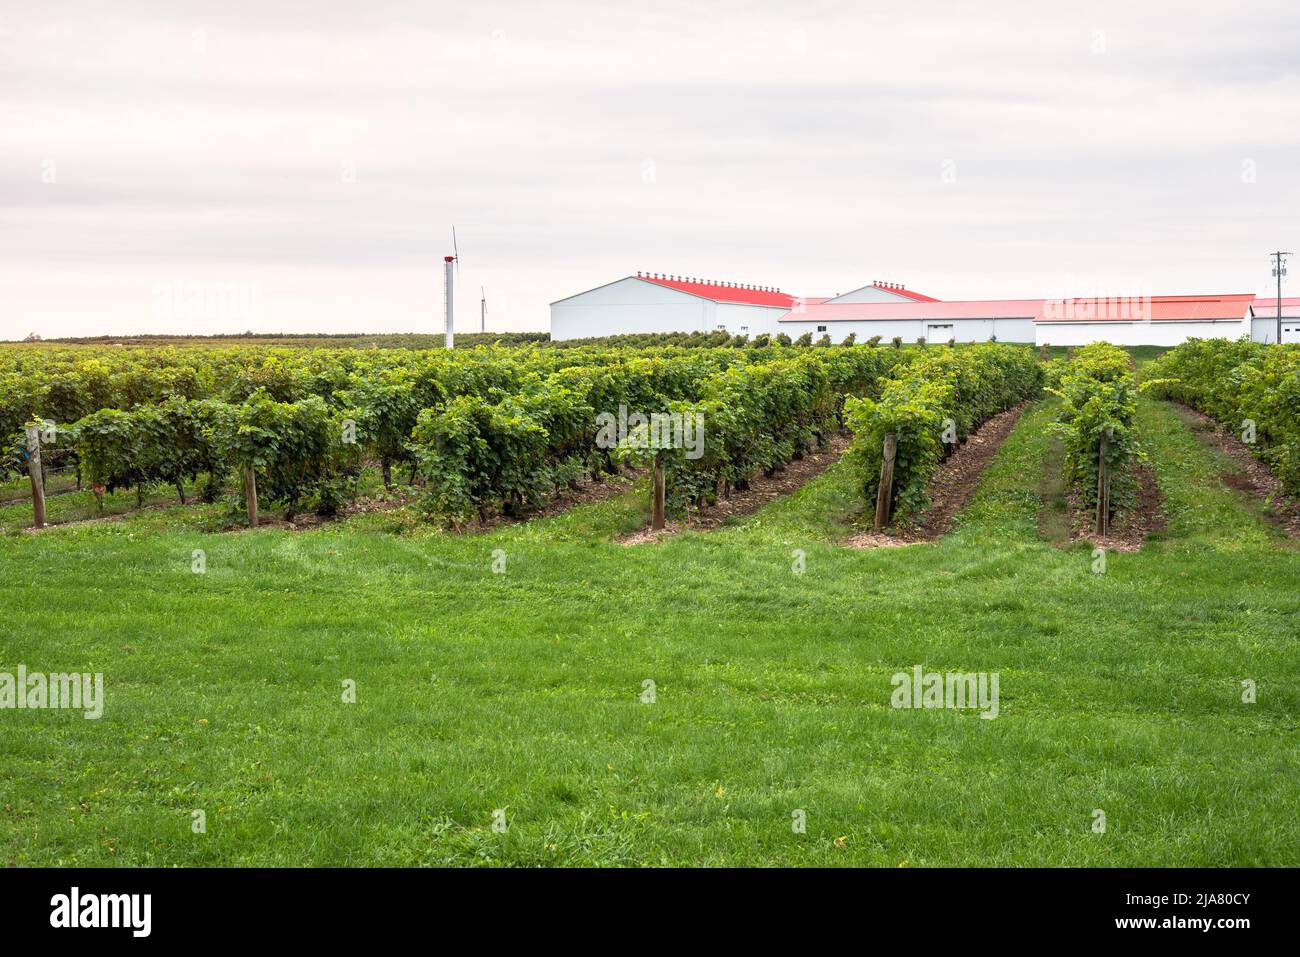 Rows of grapevines in a winery on a cloudy autumn day Stock Photo